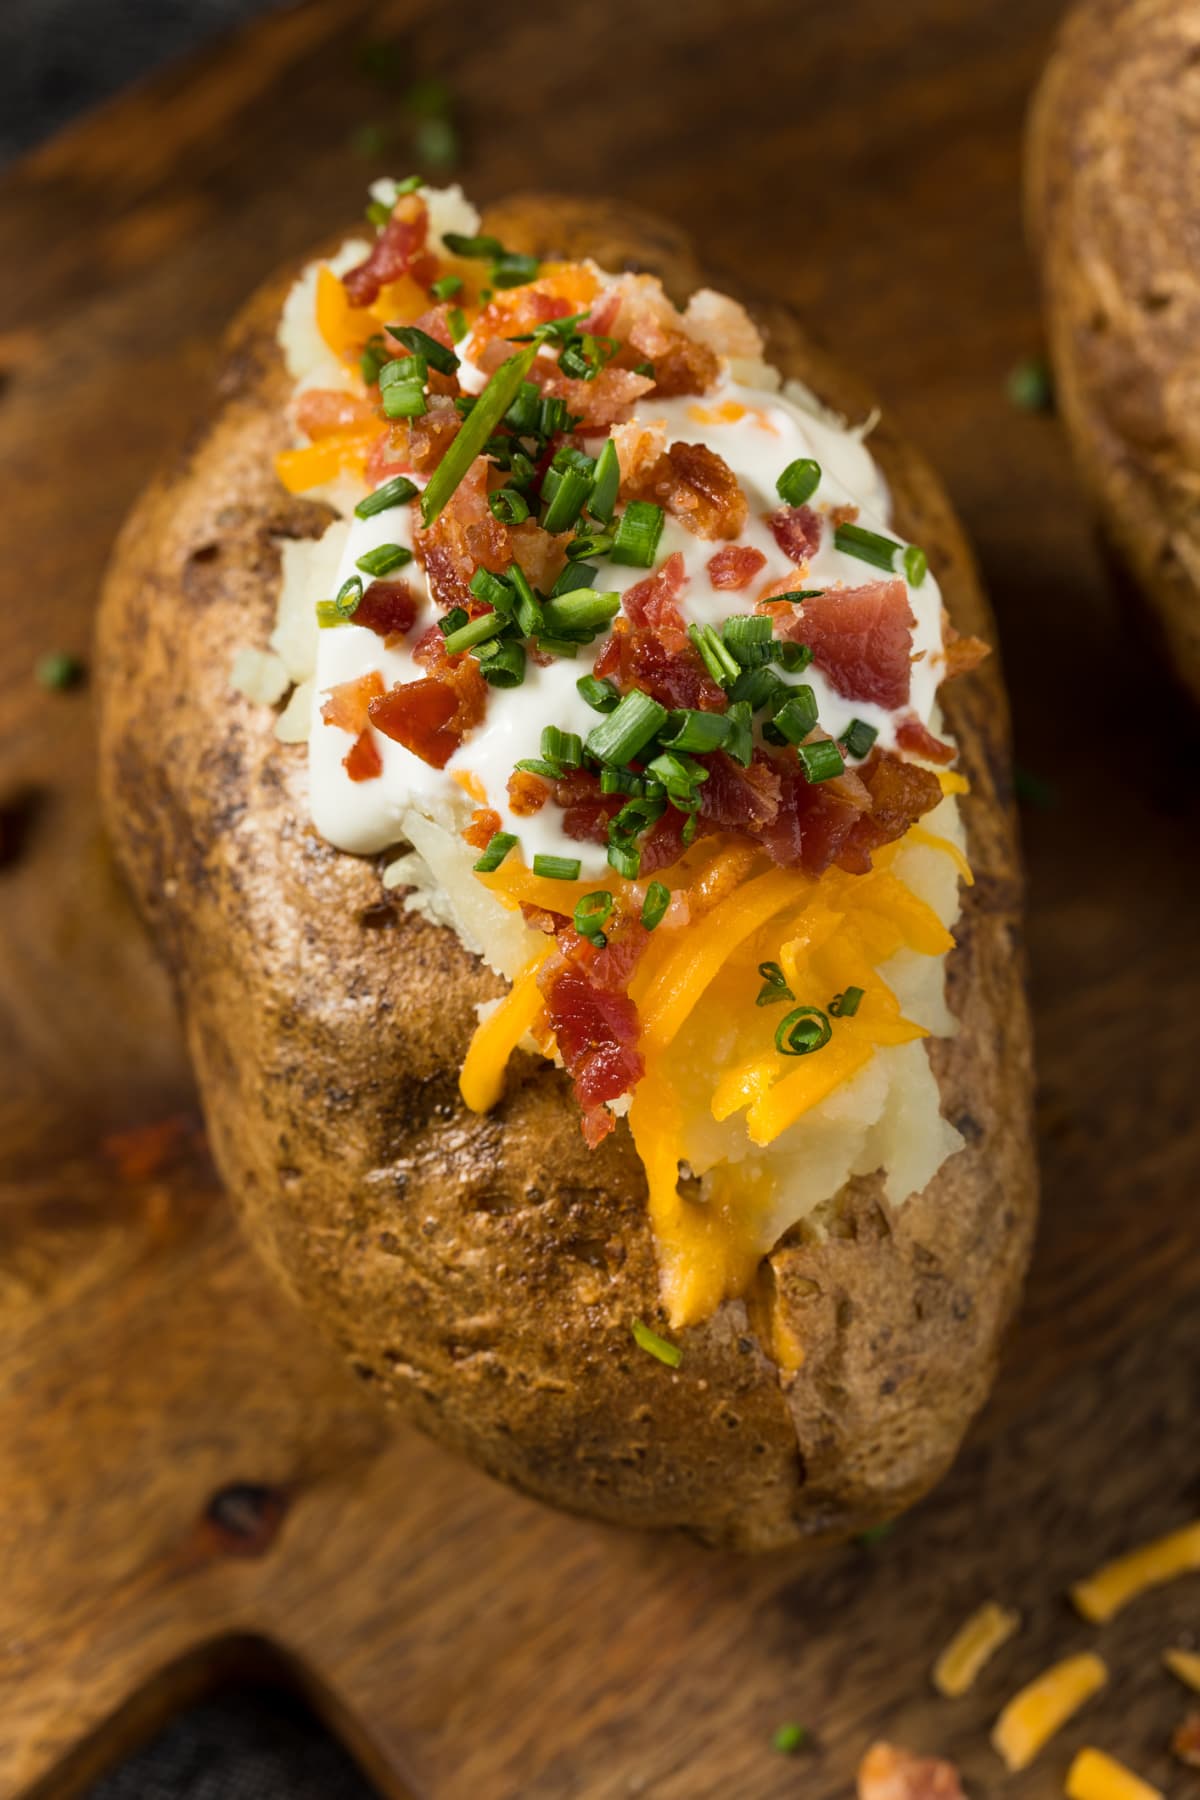 Homemade loaded baked potato with bacon, cheddar, and sour cream